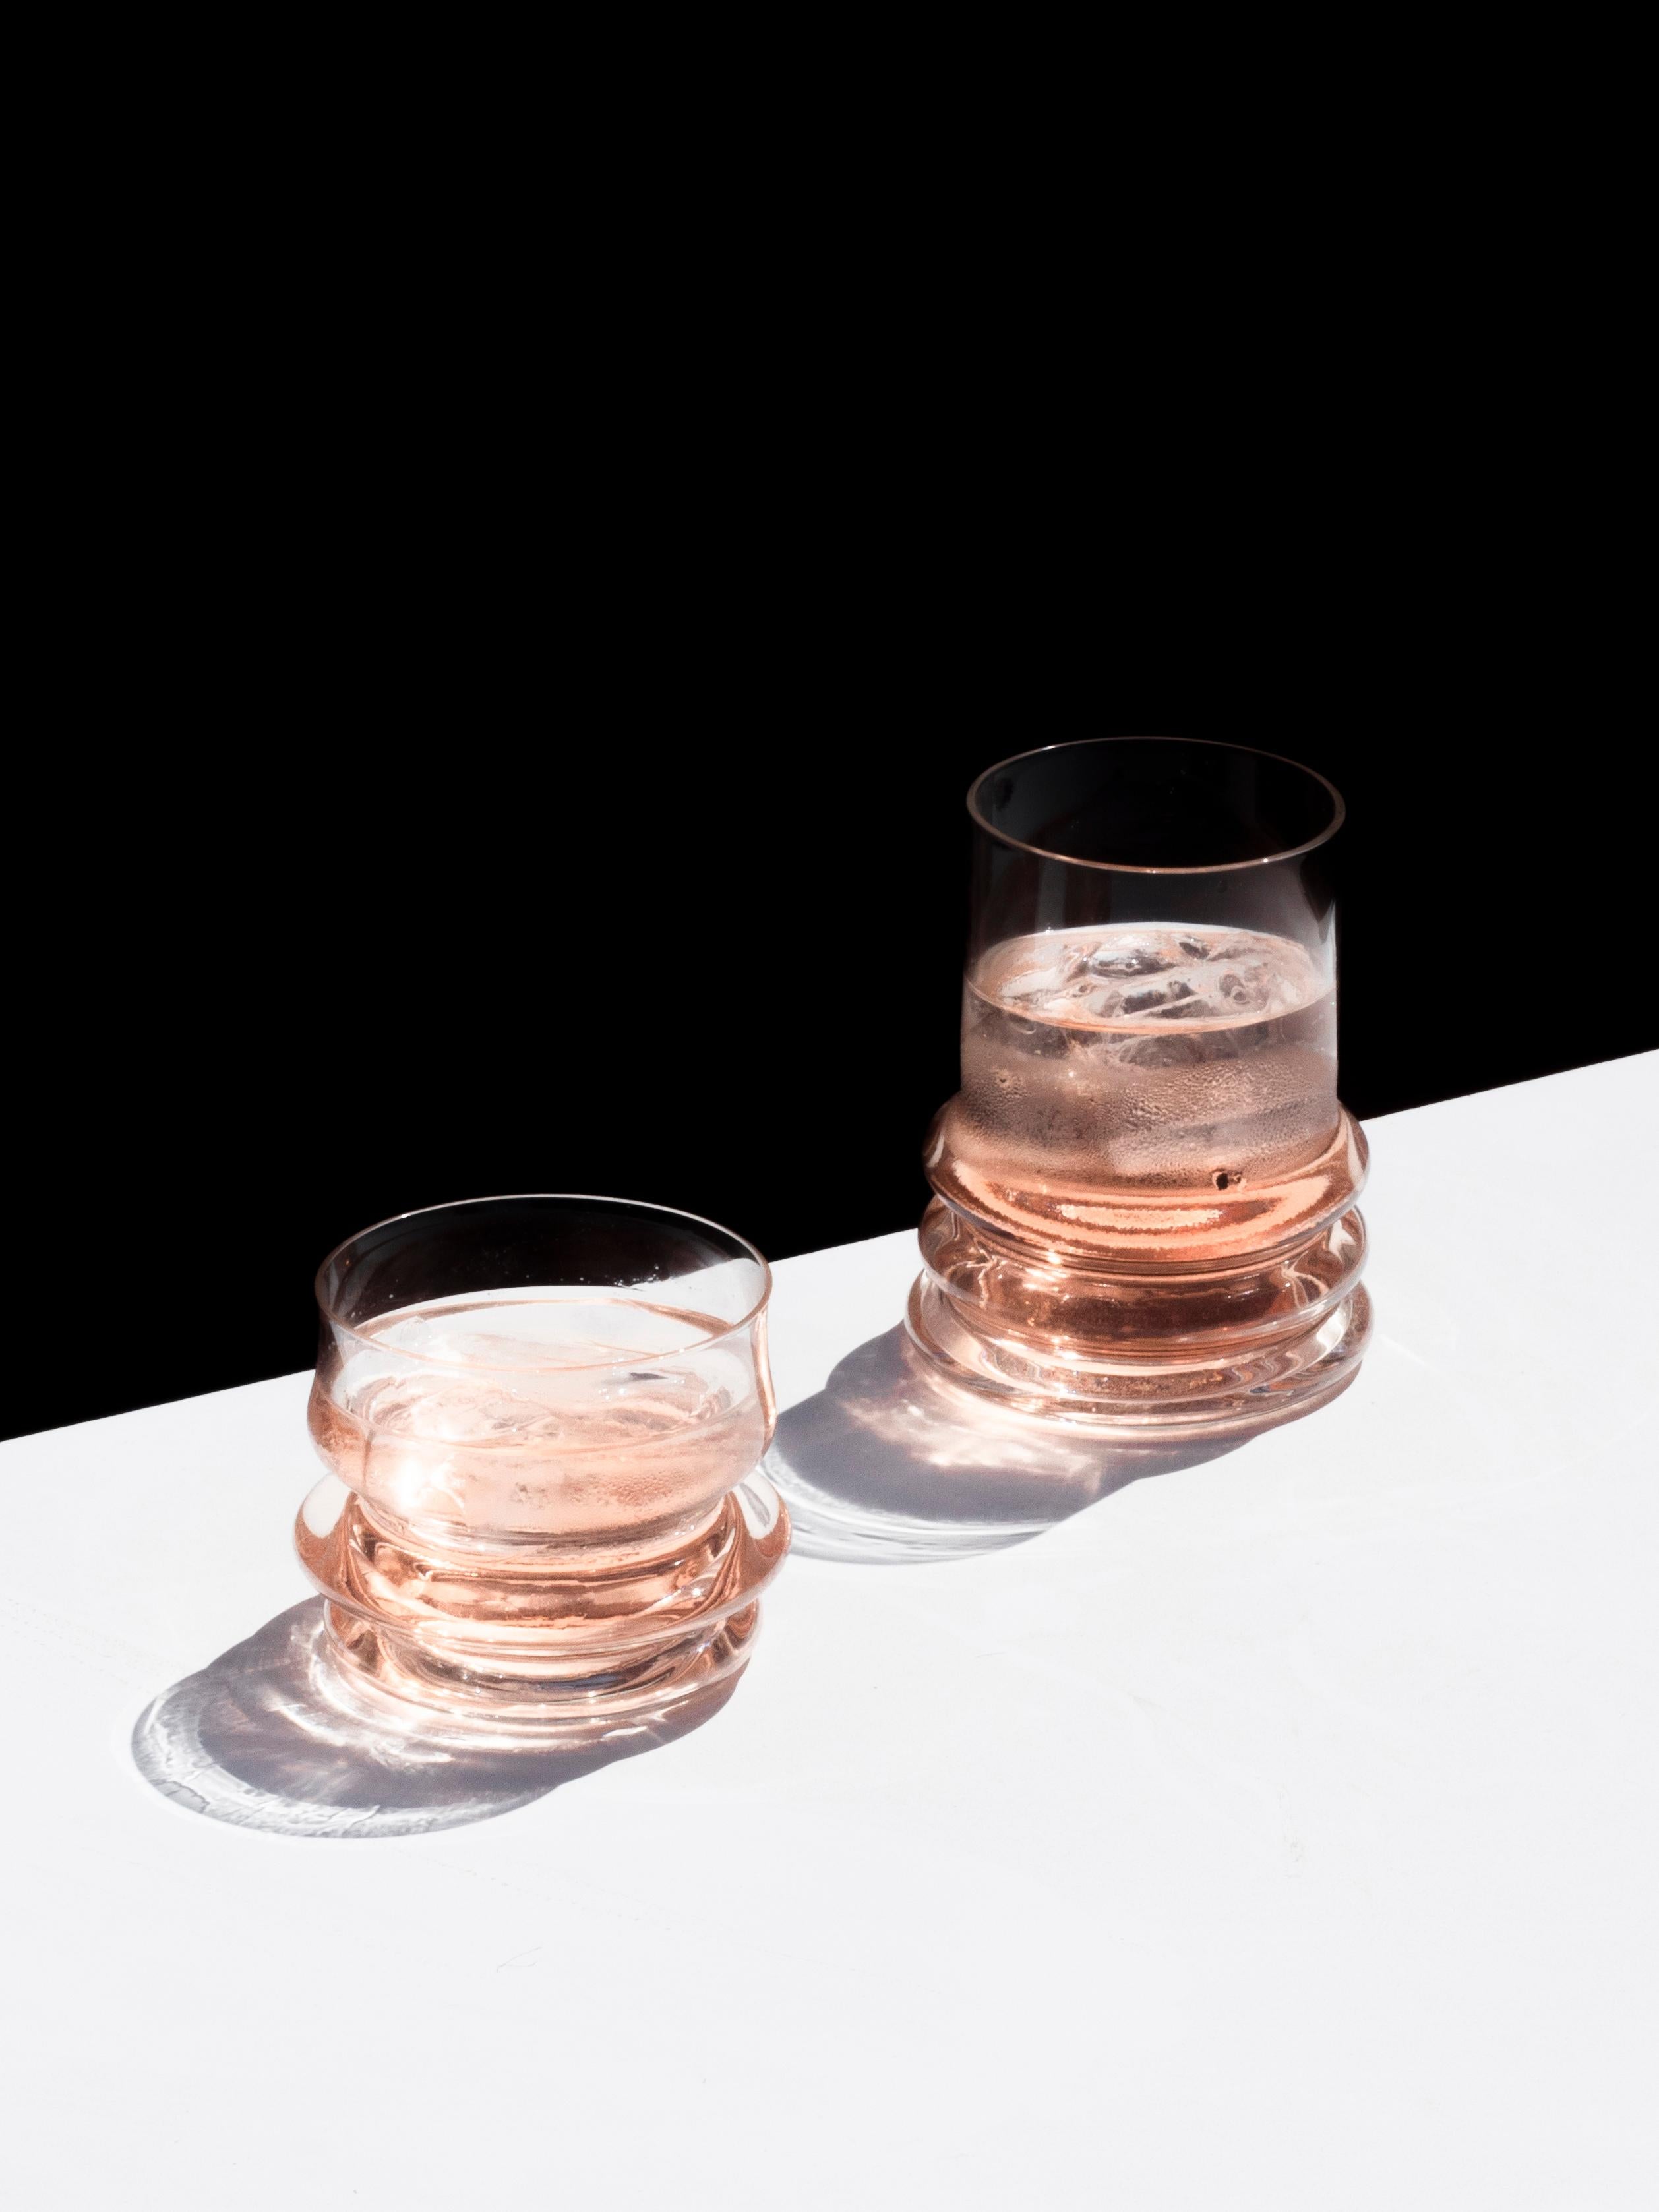 Fuso tall glass by Ries
Dimensions: D 9.5 x H 12 cm 
Materials: crystal

Ries is a design studio based in Buenos Aires, Argentina, focused on product and conemporary furniture design. The studio’s approach to design is influenced by it’s members